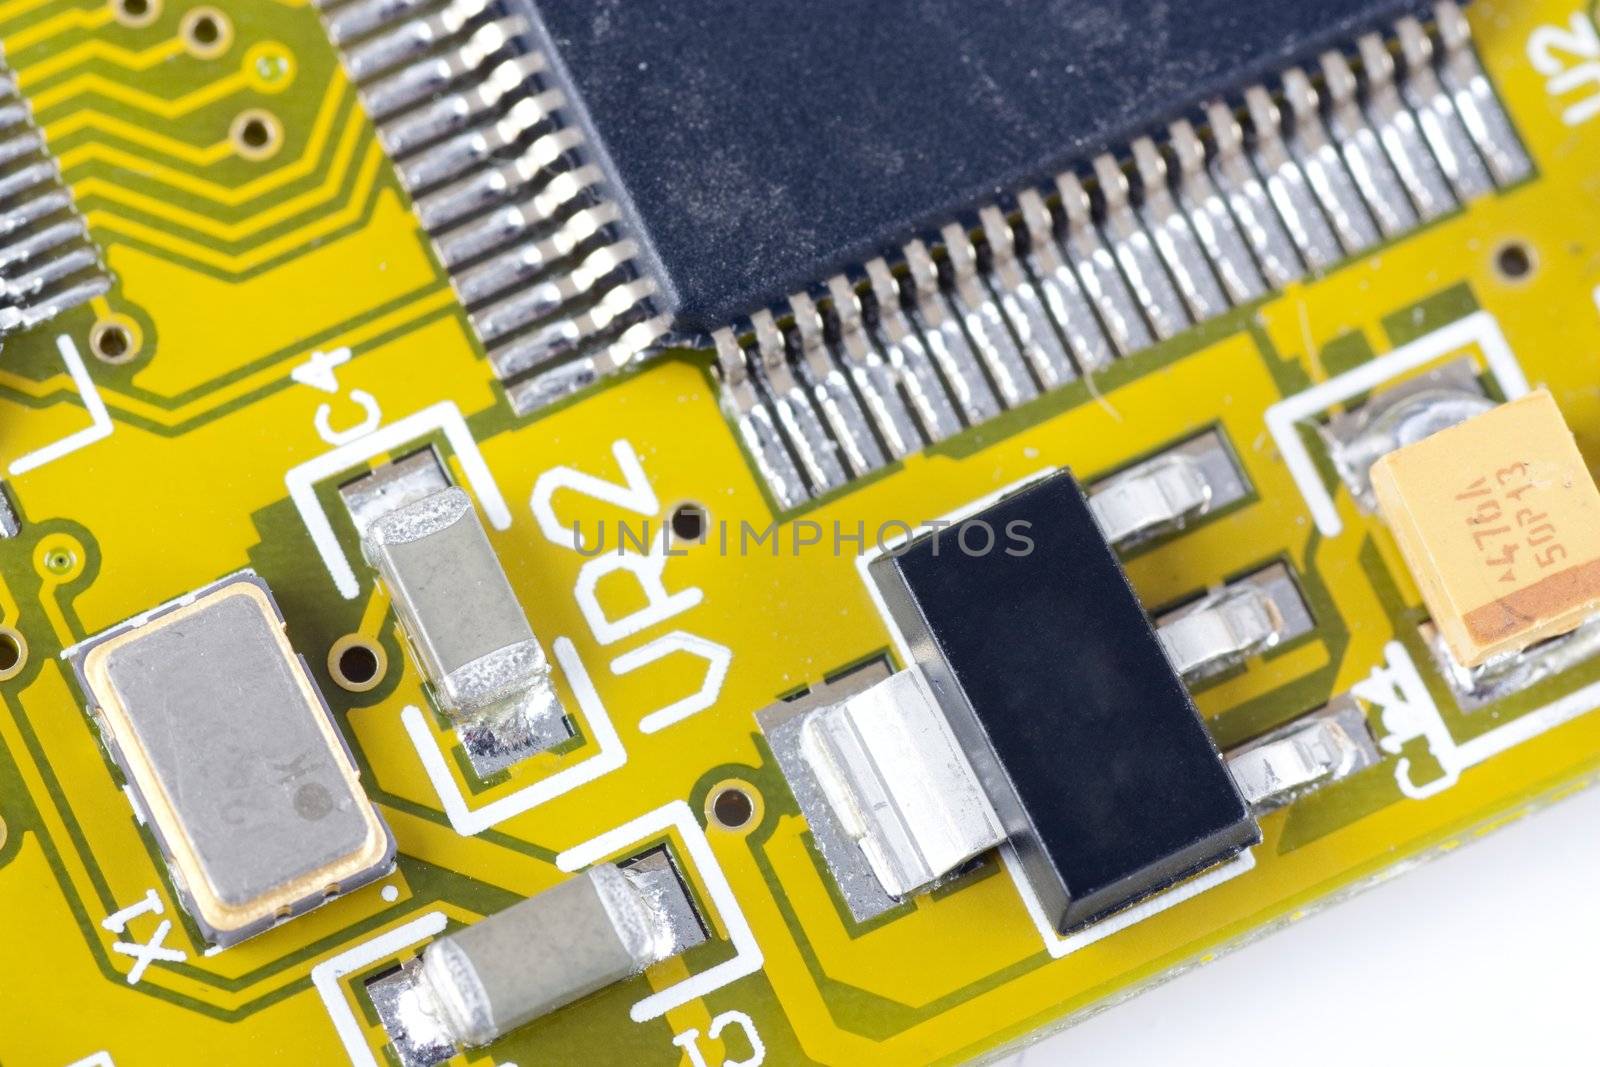 Closeup of circuit board showing circuits and microprocessor.  